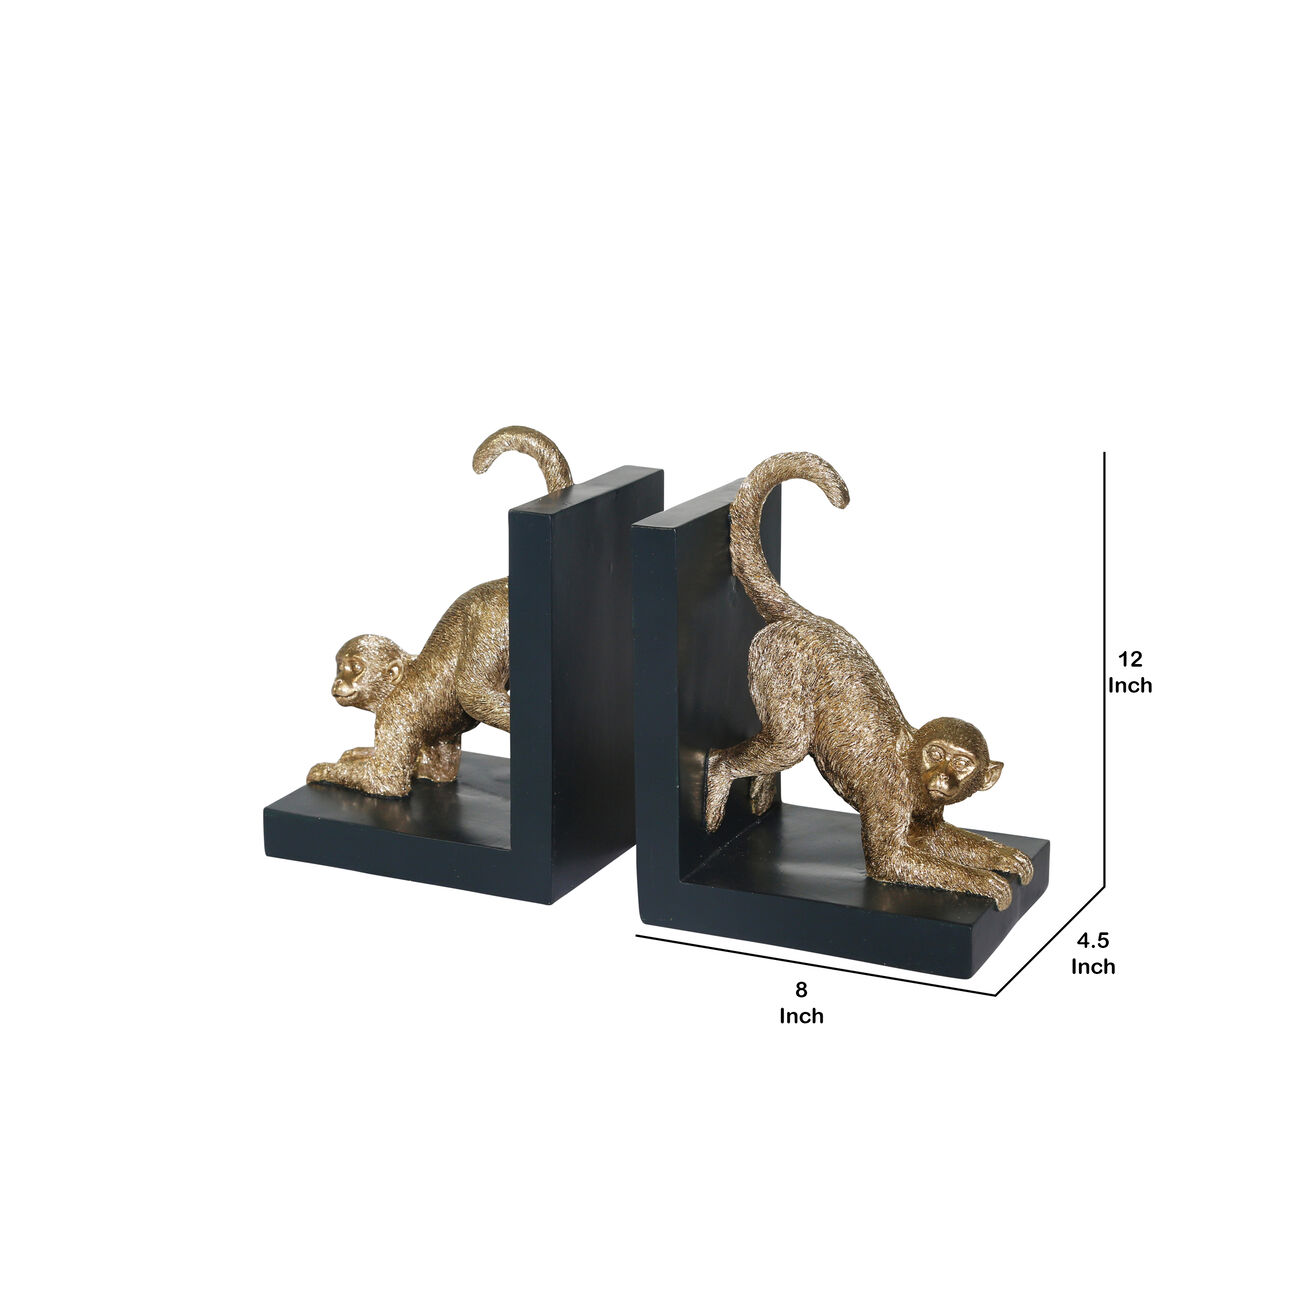 Wooden Bookend with Polyresin Monkey Figurine, Pair of 2, Black and Gold